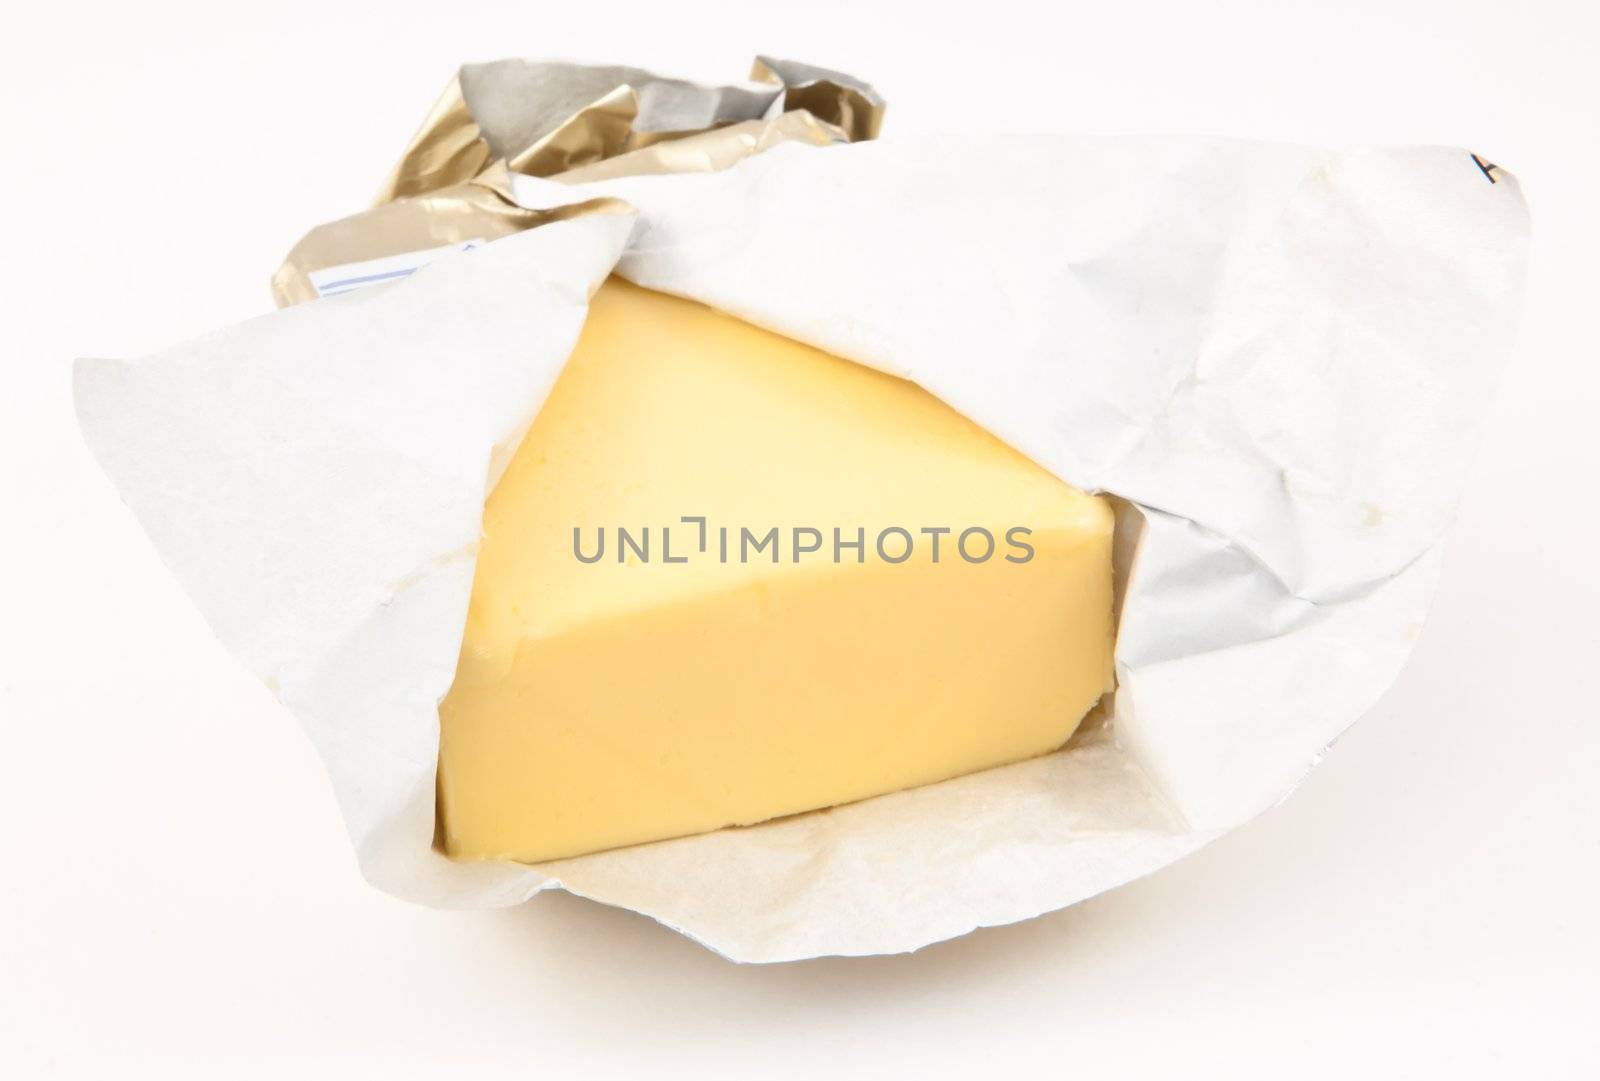 Open pat of butter against white background